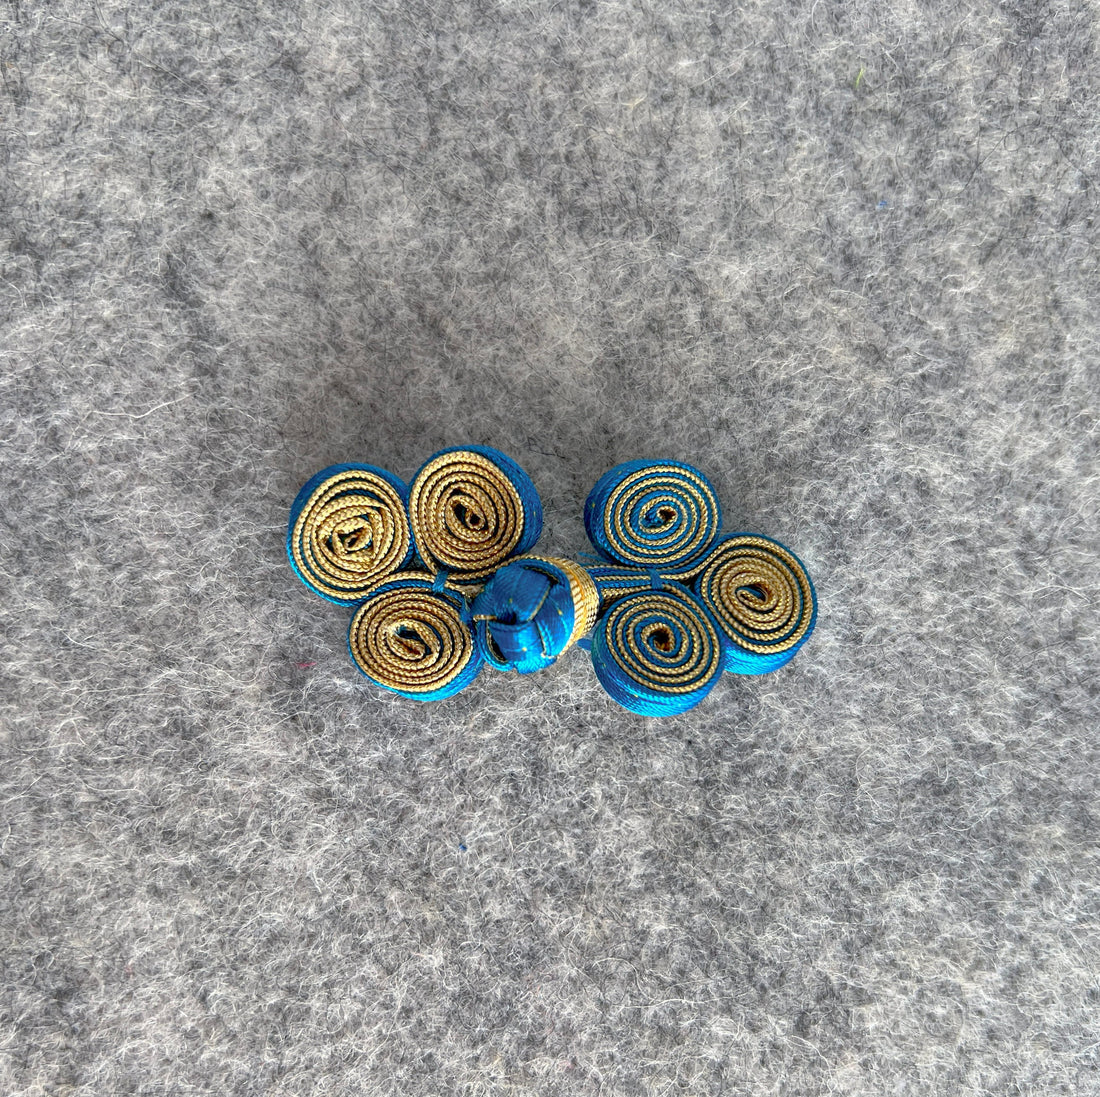 Clover Ribbon Button (Blue and Gold, Set of 2) Qipao Button Pankou Cheongsam Decorative Closure, Chinese New Year Dress Button, Button